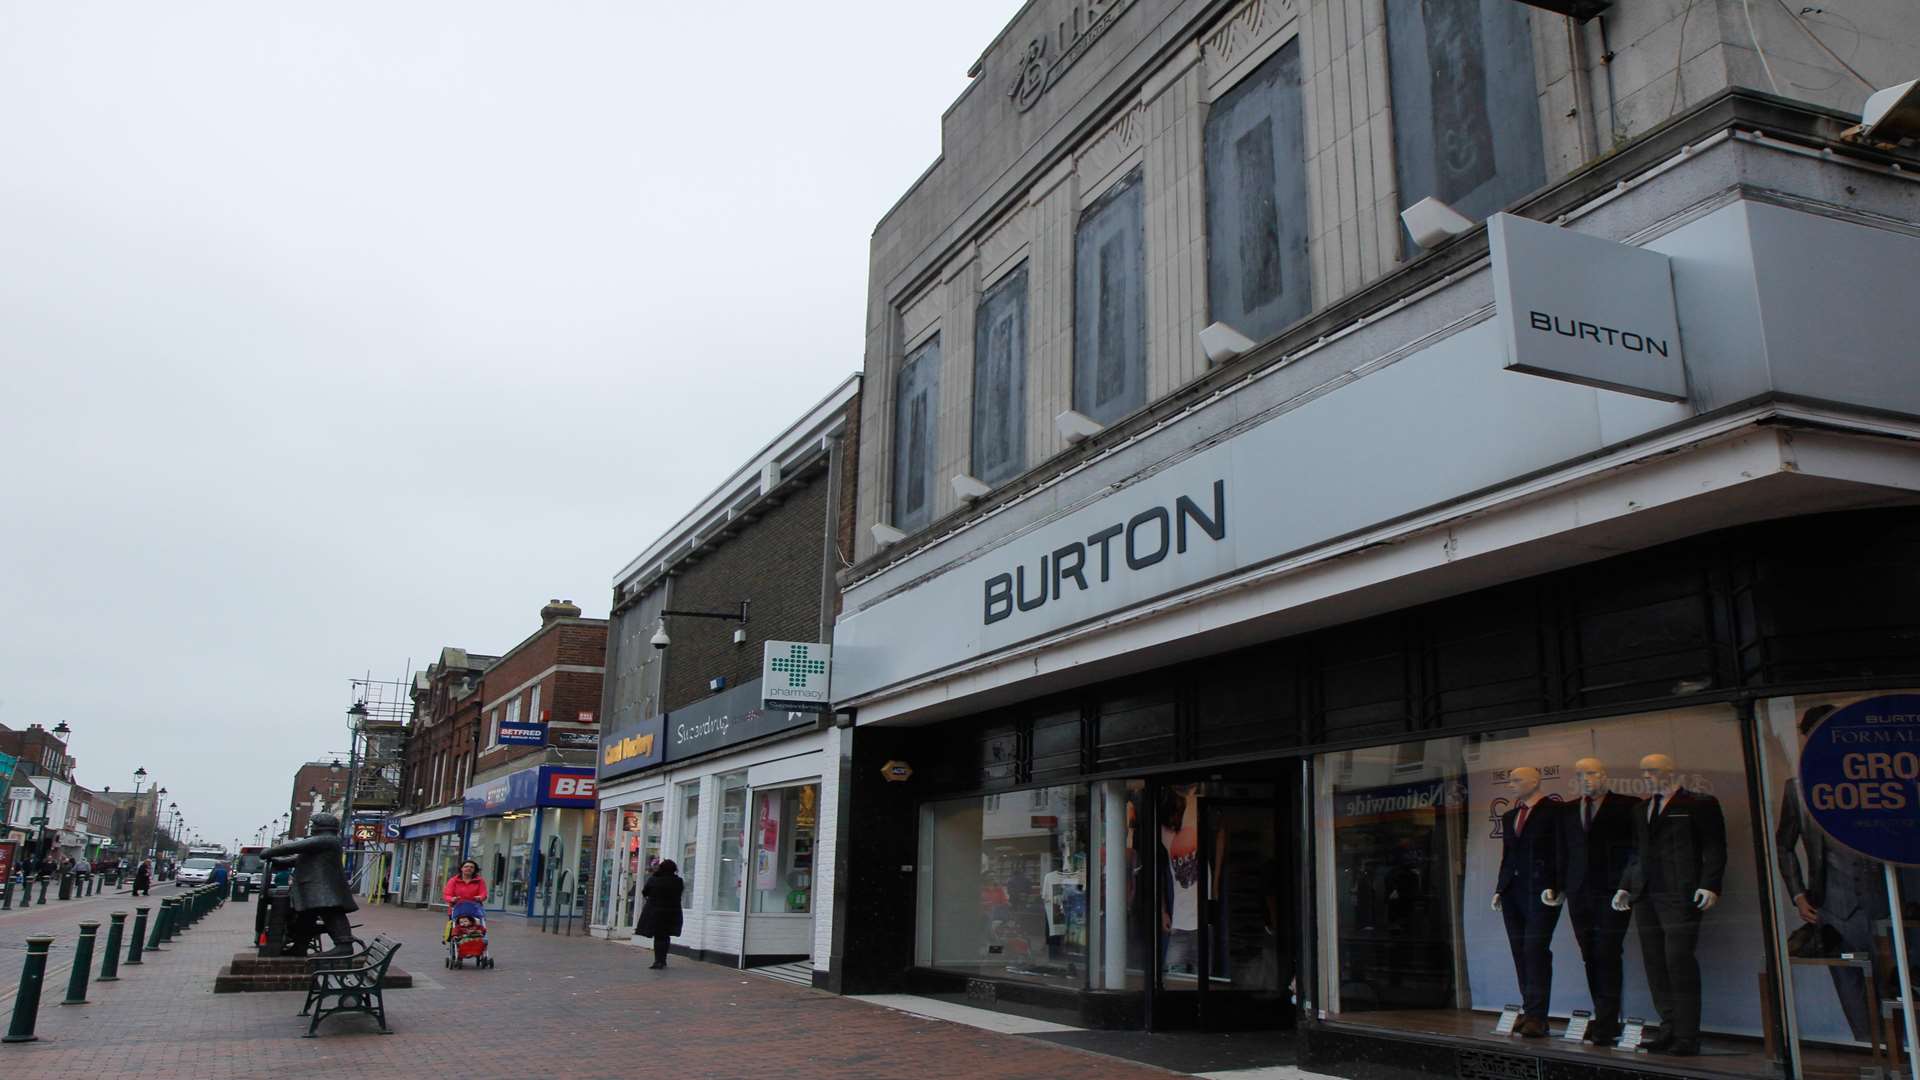 The man was attacked outside Life nightclub, which is above Burton in Sittingbourne High Street